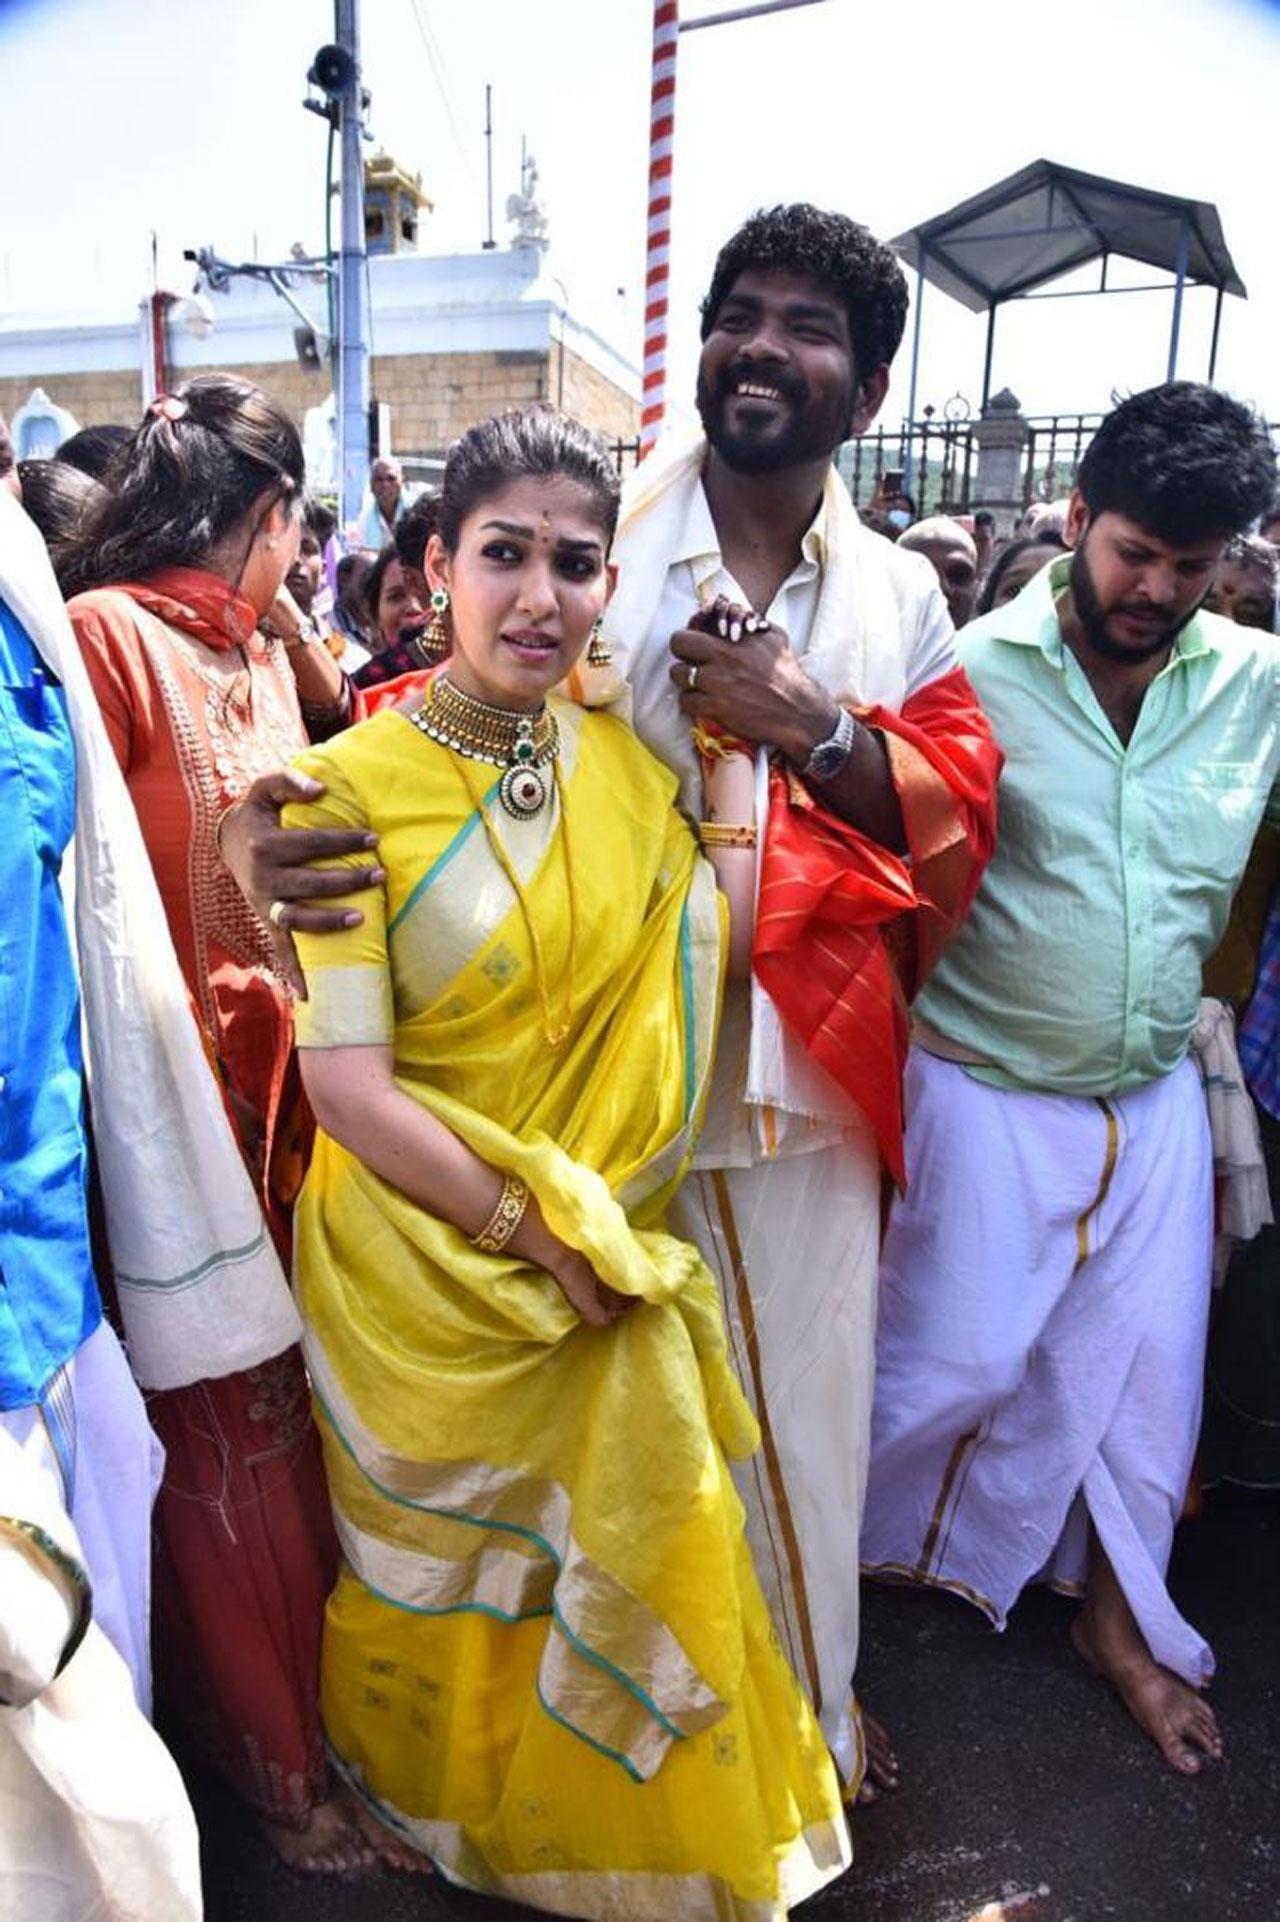 Vignesh Shivan tied the sacred 'Thali' around actress Nayanthara's neck at around 10.24 a.m. even as guests who had gathered for the wedding showered their blessings upon the newly wed couple. Sources said that the couple came down the stage after the wedding and took the blessings of actor Rajinikanth who was seated next to Shah Rukh Khan and director Mani Ratnam in the audience